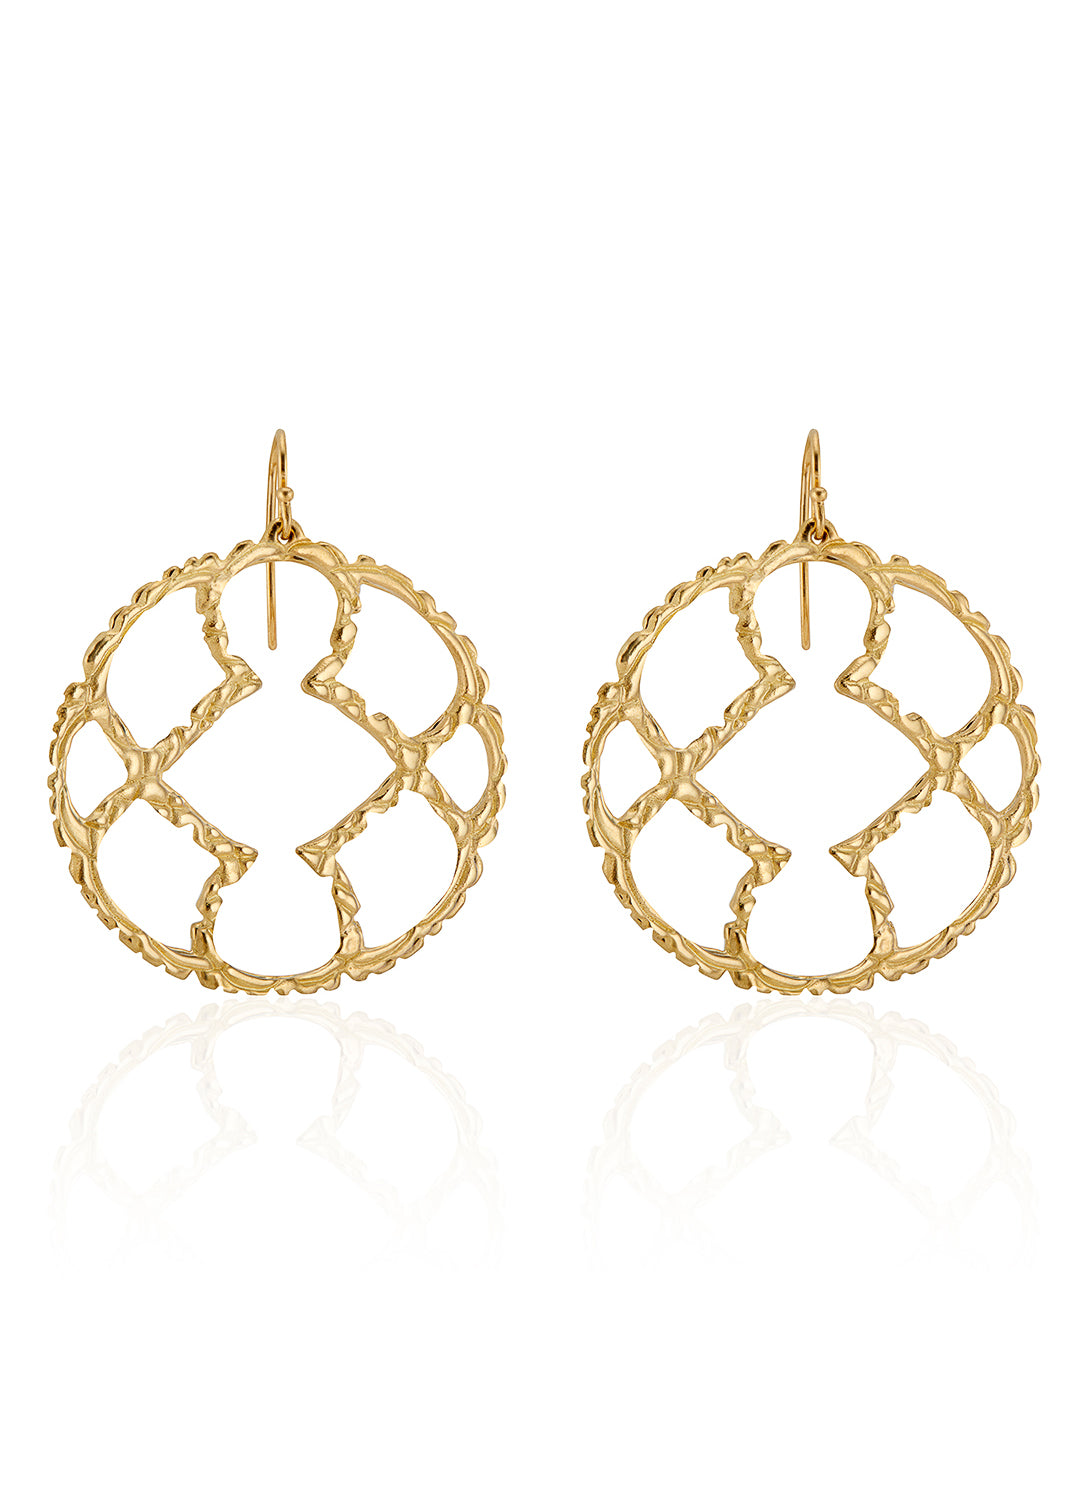 Inspired by the hand-sewn lace of an antique wedding gown grown papery with age, the Florence earring captures the ornate handiwork and craftsmanship of a bygone era. Textured gold filaments create an open-work pattern that evokes timeless elegance. 